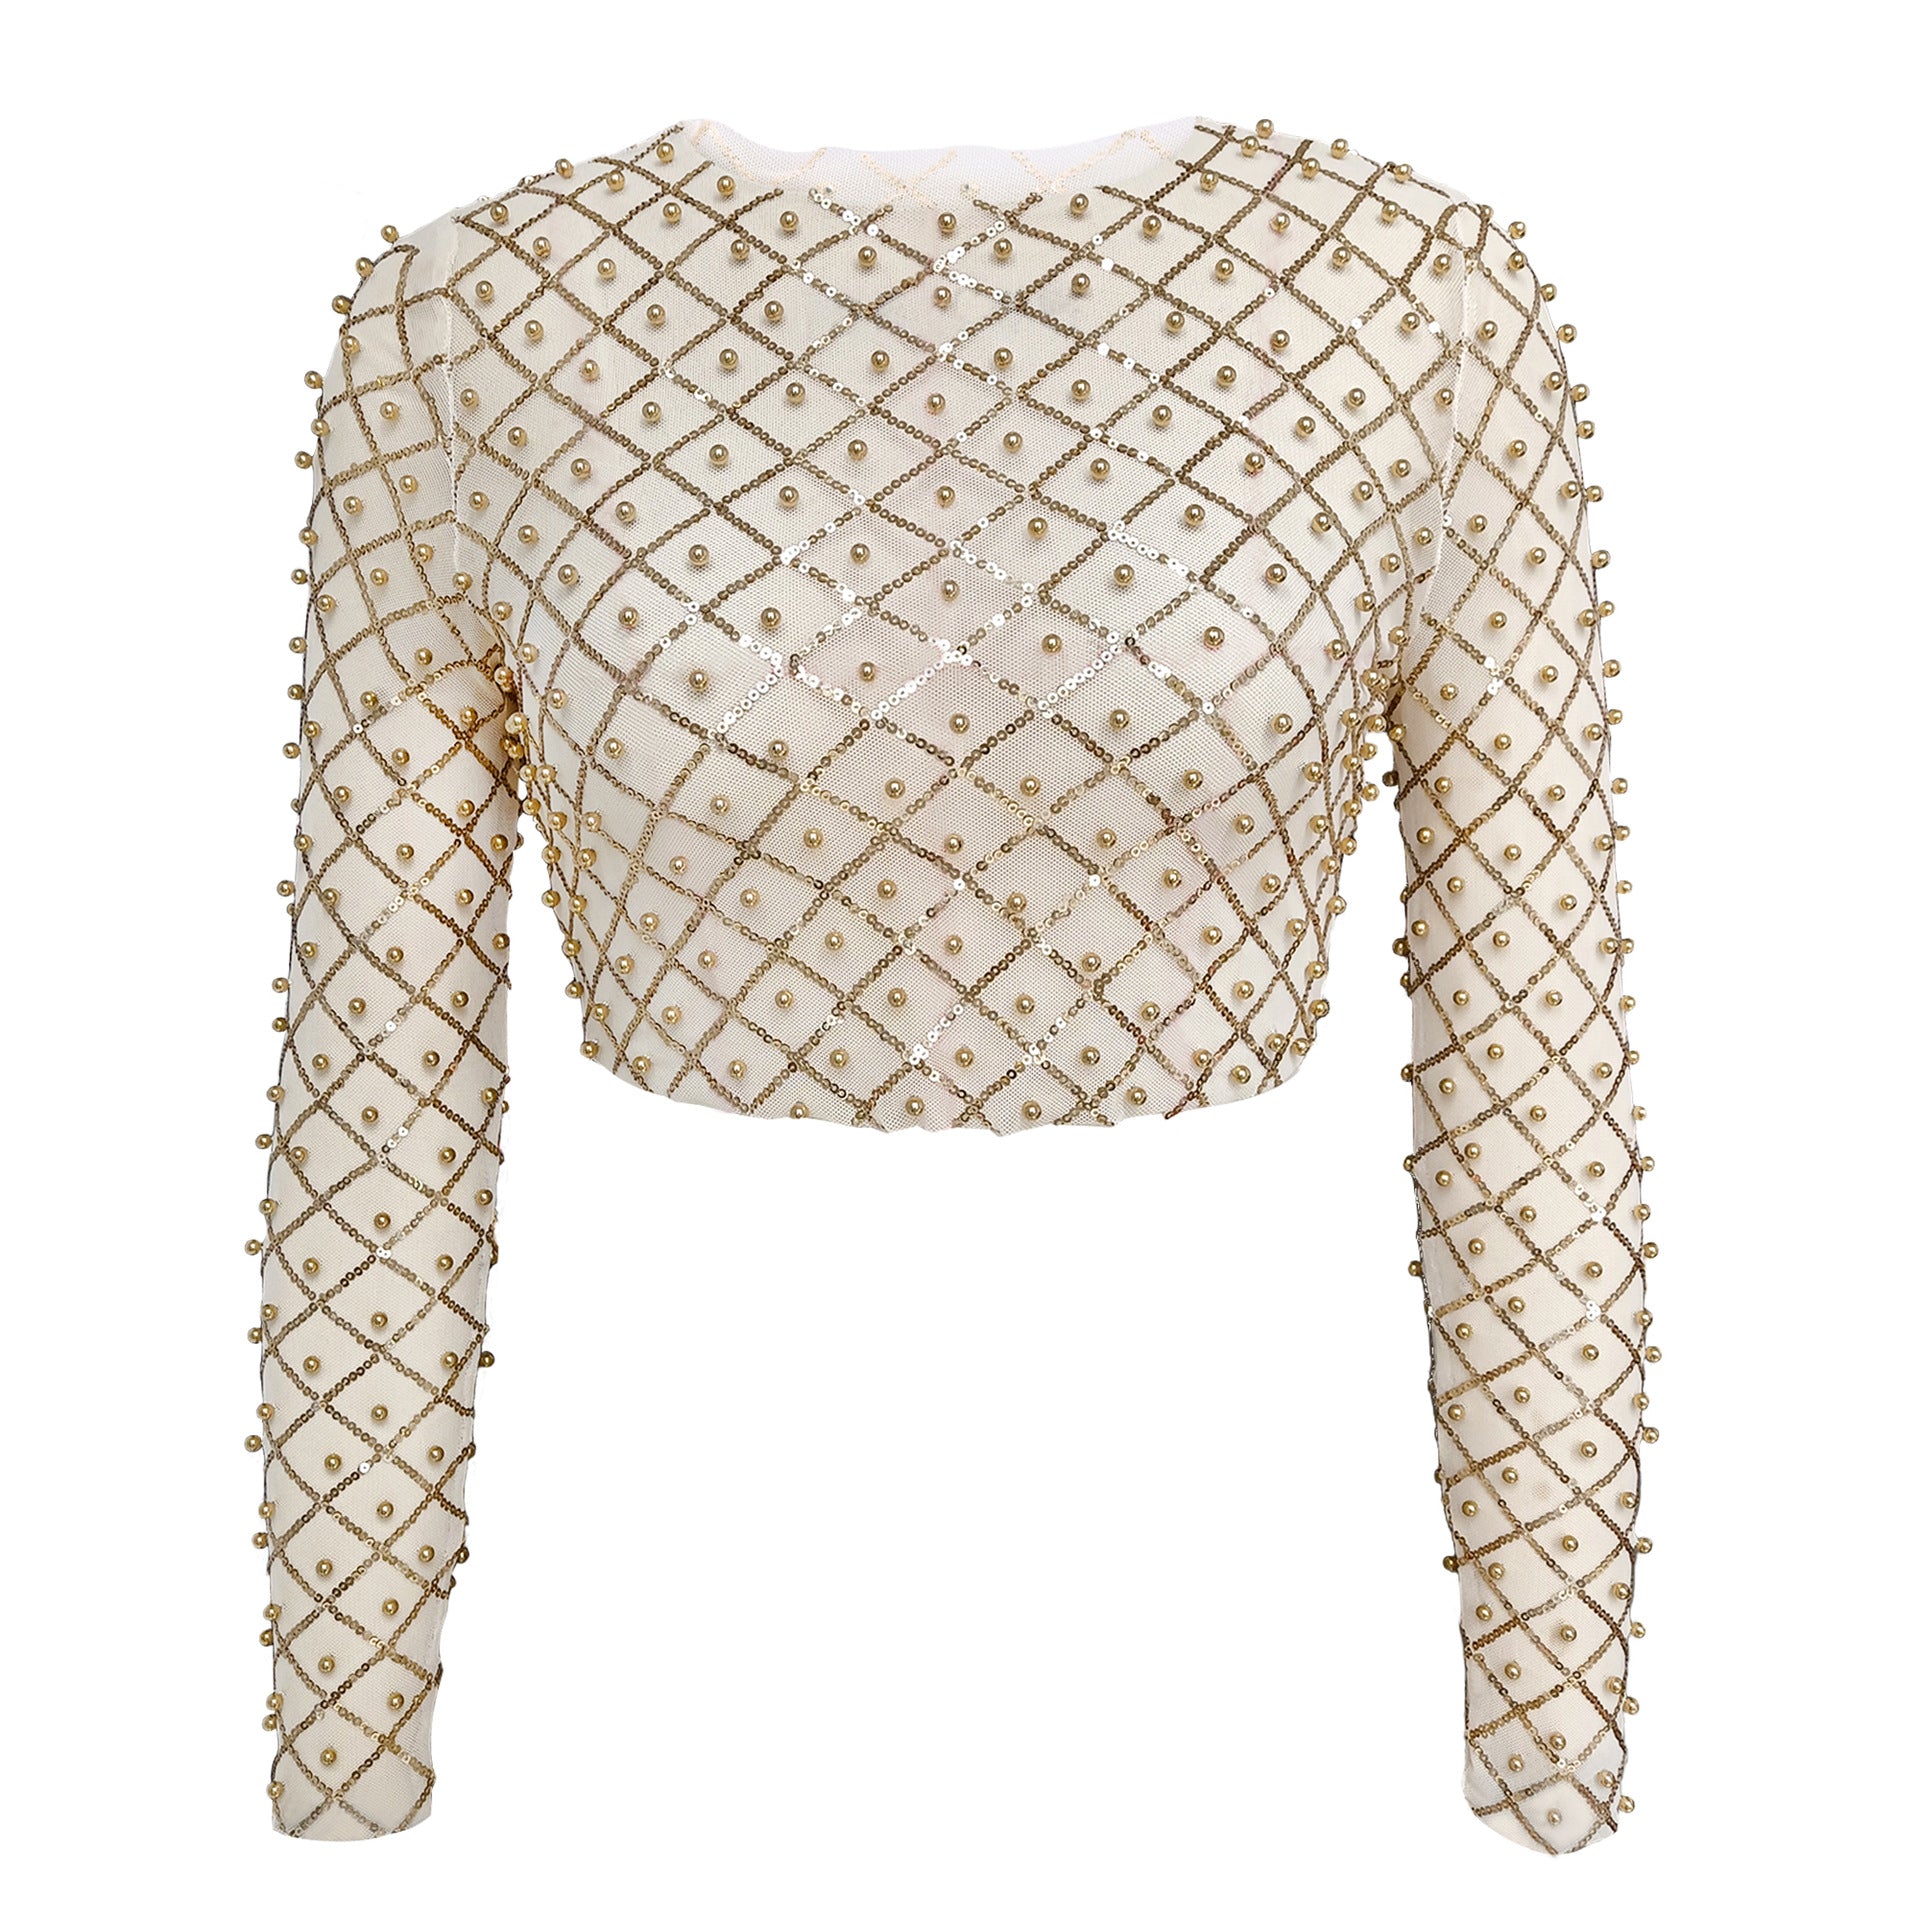 A Mesh Studded Sequin Long-sleeved Shirt from Maramalive™ crafted from polyester fiber, featuring a gold lattice pattern studded with small gold beads, perfect for achieving that celebrity style.